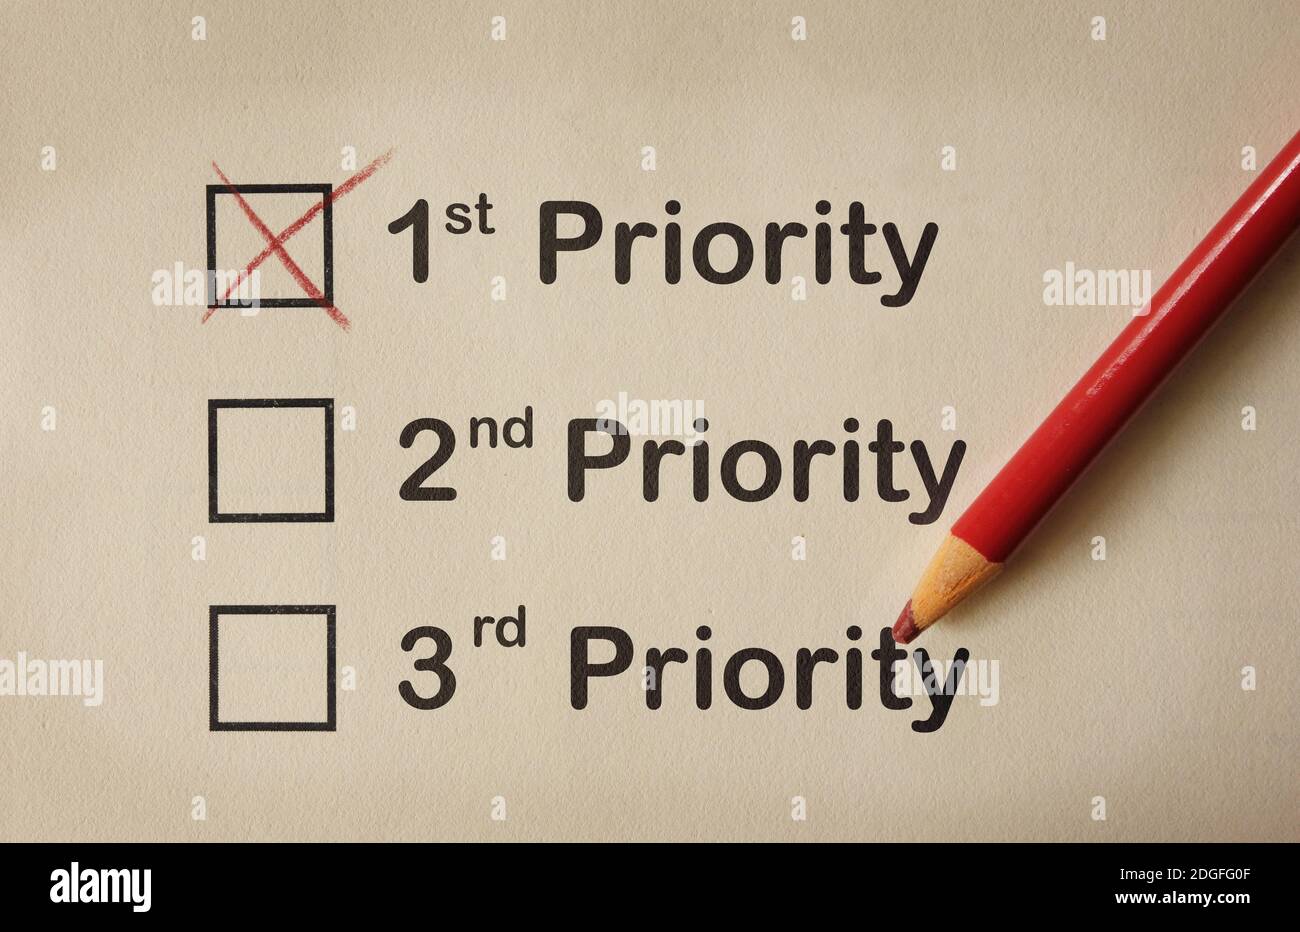 First priority marked on paper Stock Photo